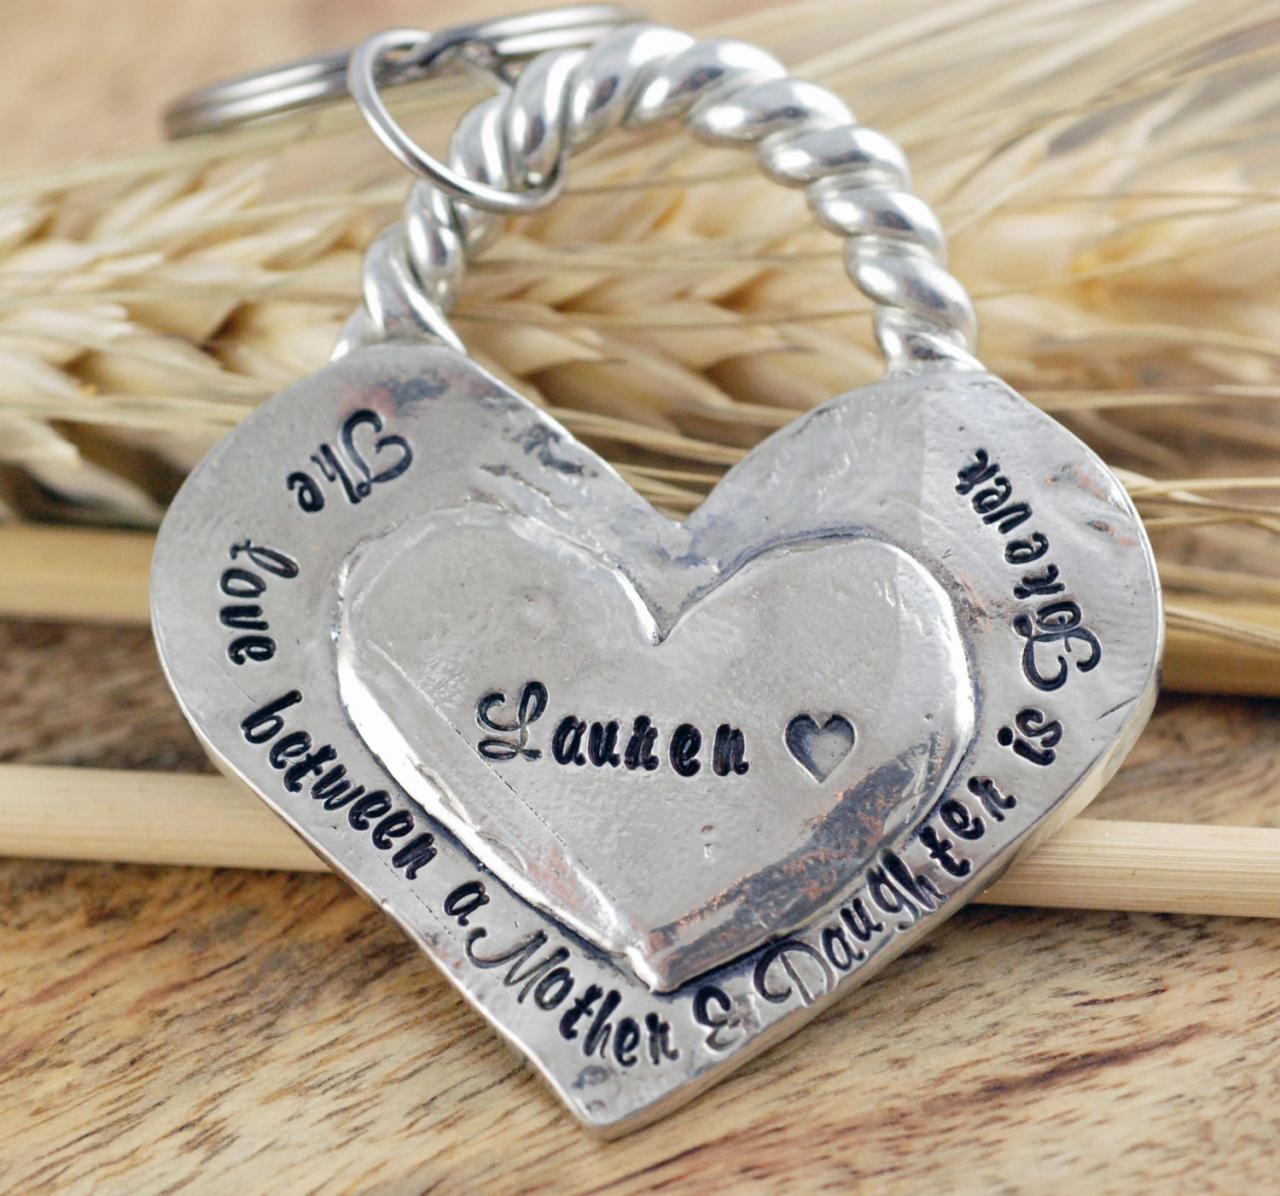 Personalized Key Chain - The Love Between A Mother And Daughter Is Forever - Hand Stamped Keychain - Gifts for Mom - Mother Daughter Gift